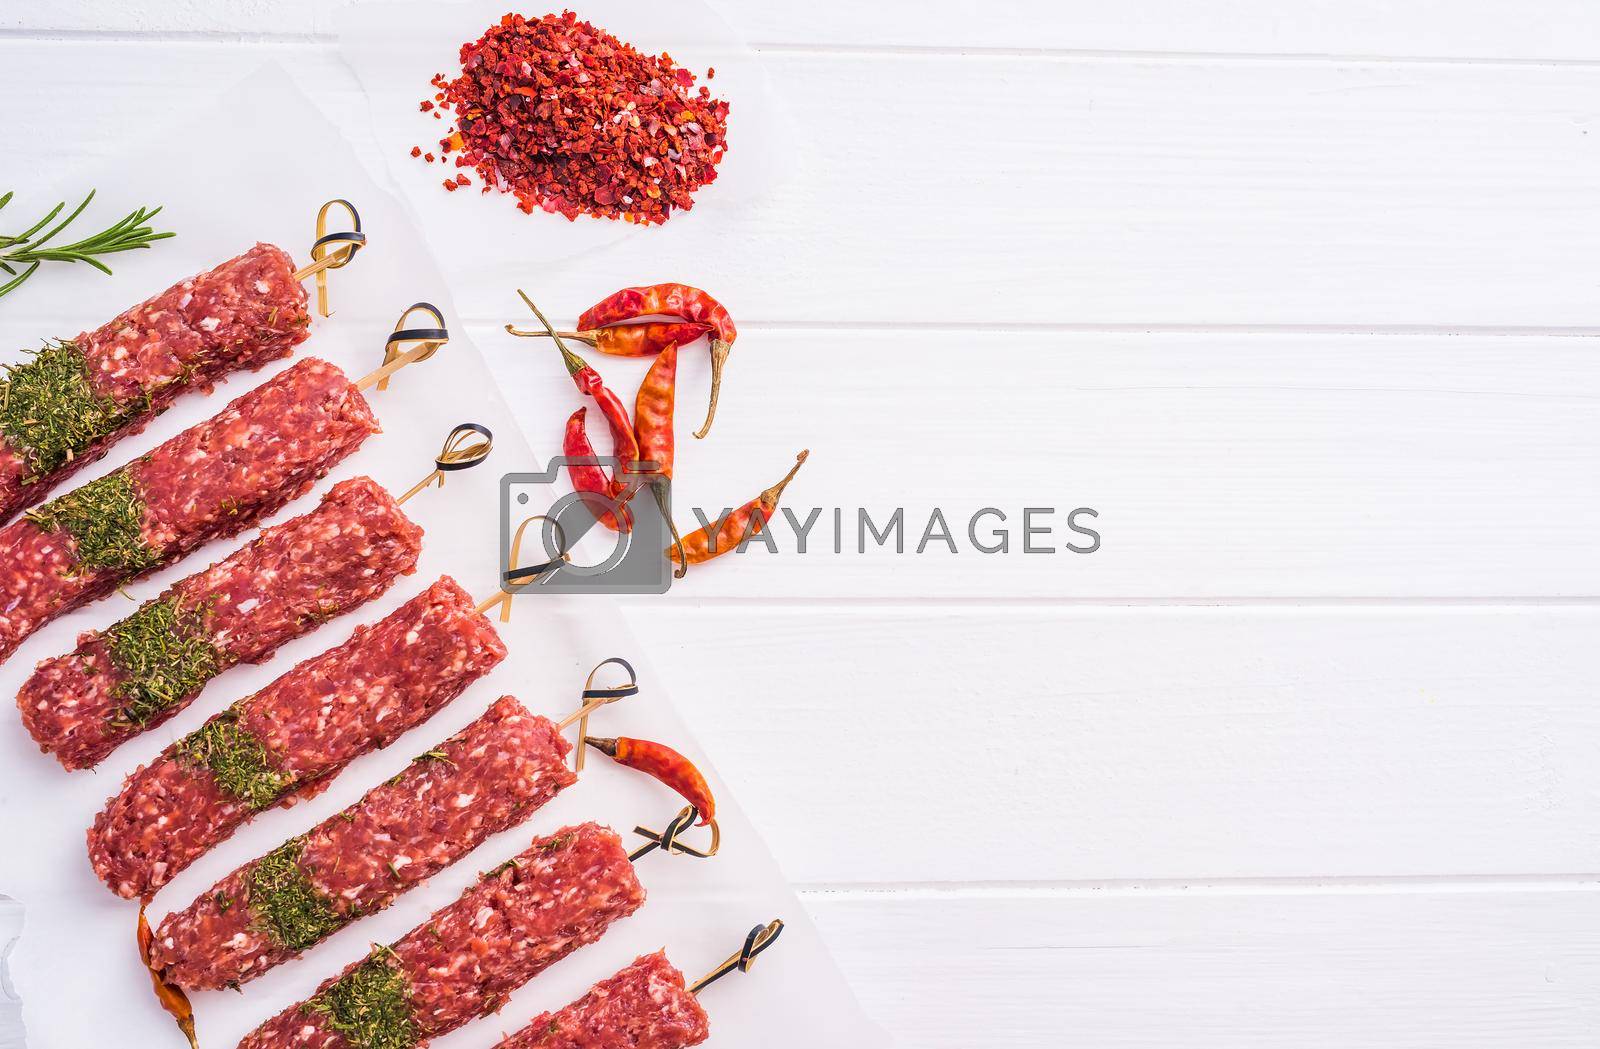 Royalty free image of Raw kebab with spices by GekaSkr